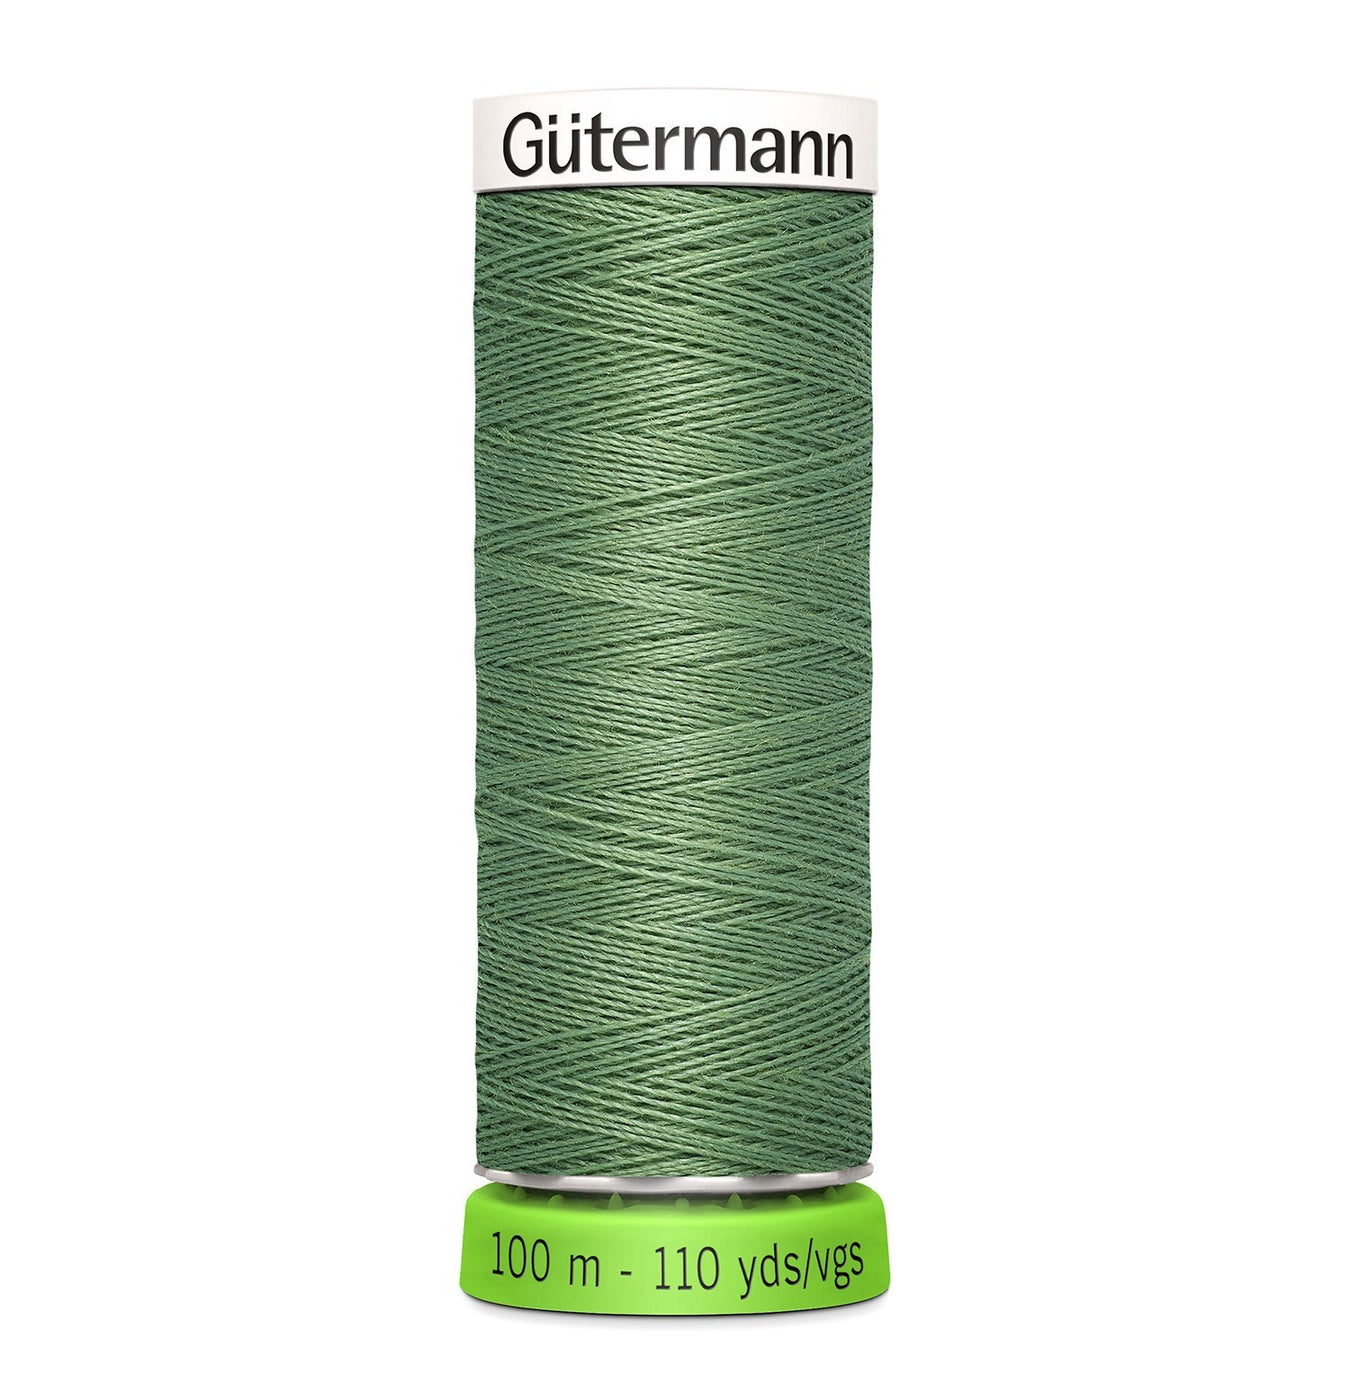 Gutermann Recycled Sewing Thread